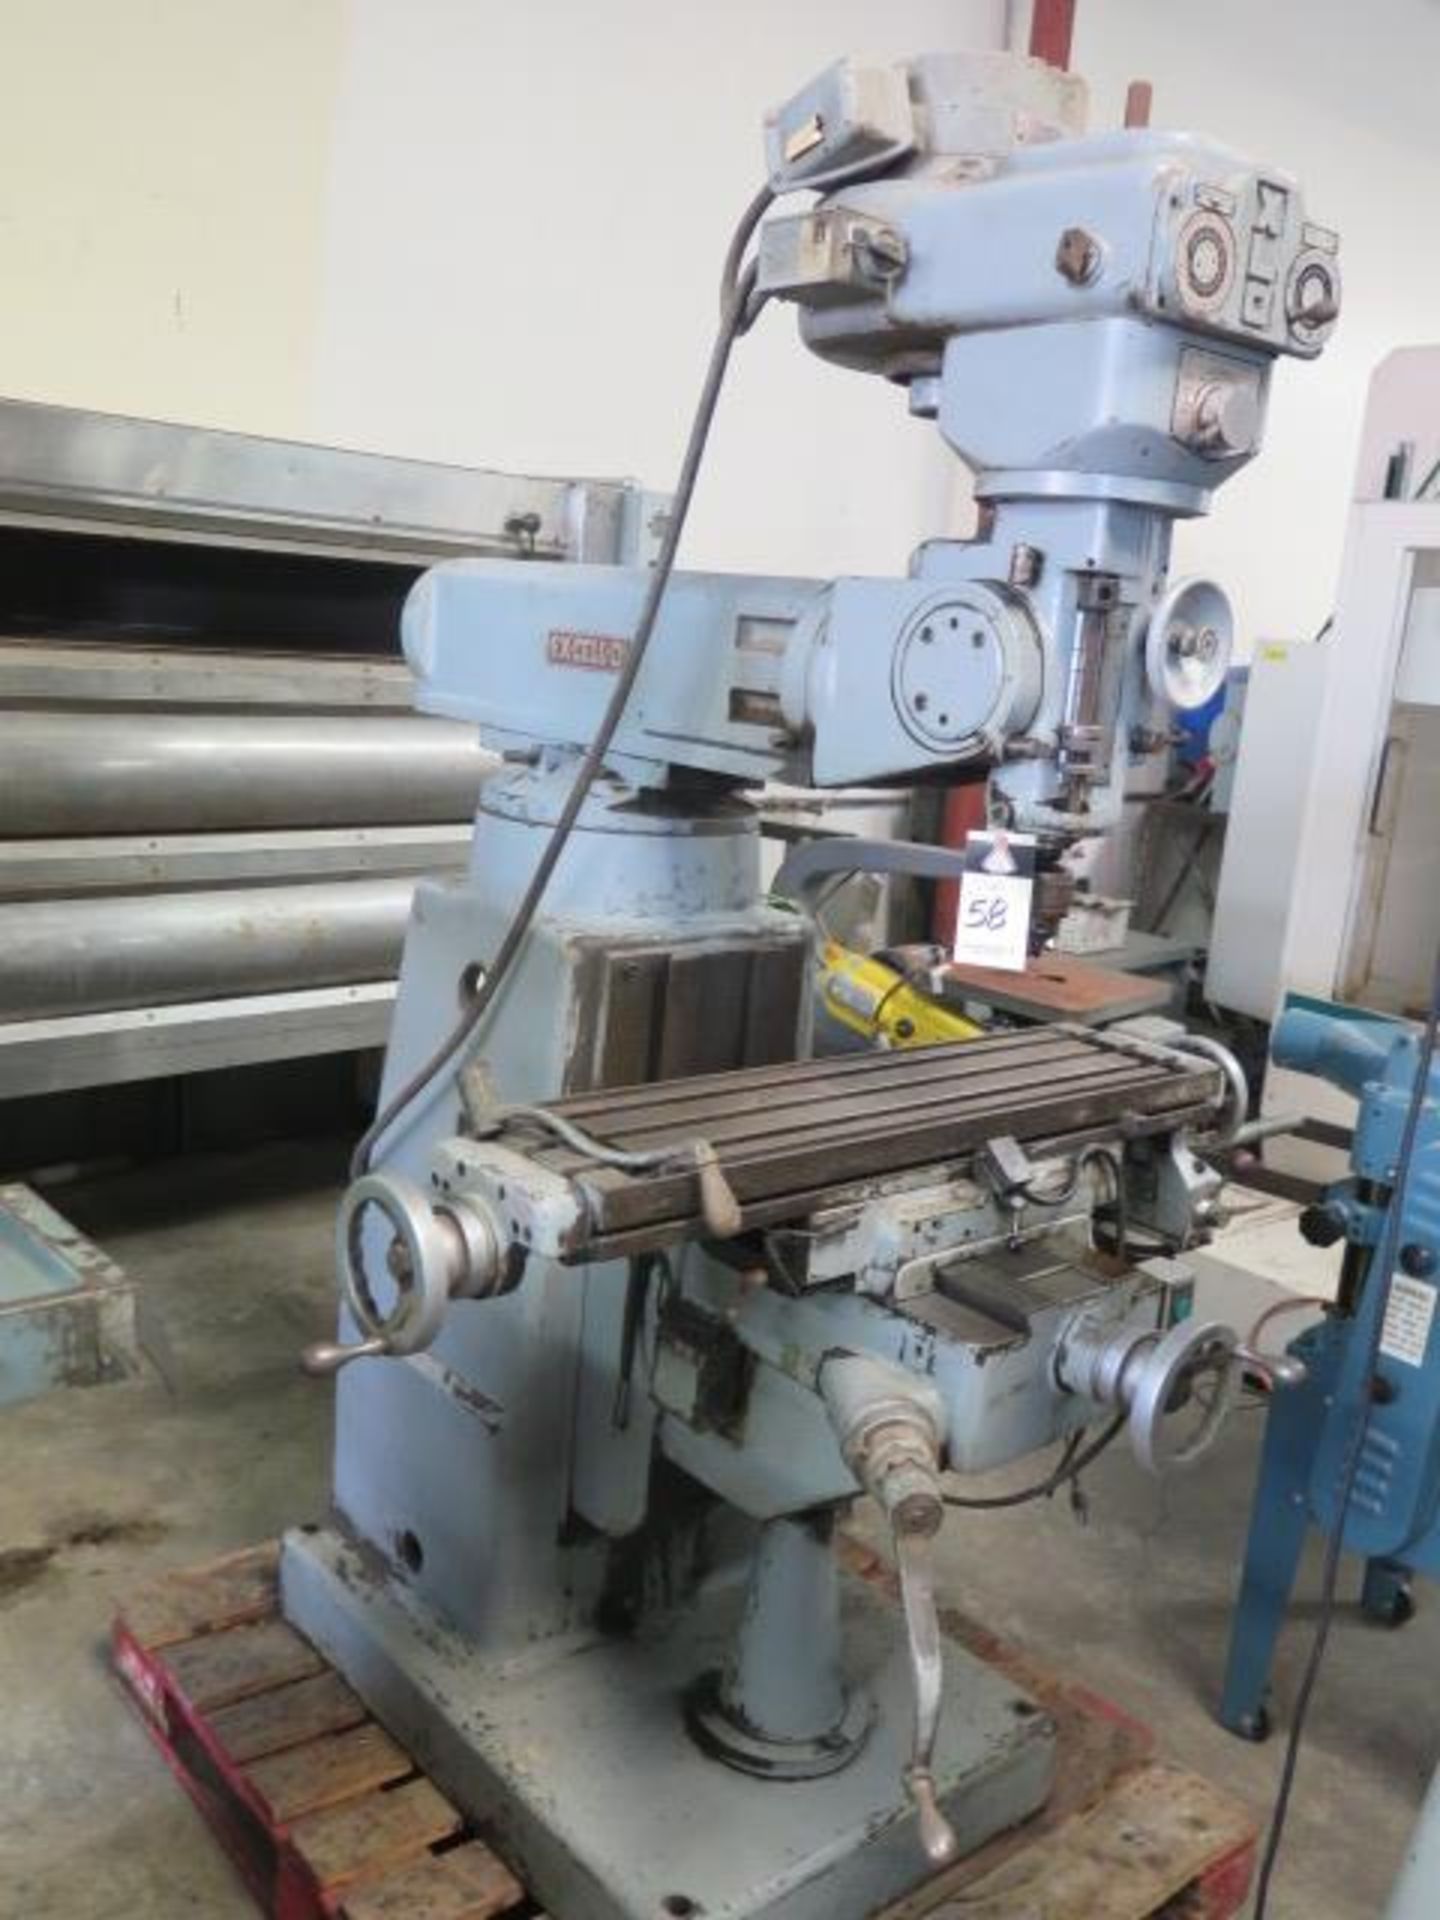 Ex-Cell-O Vertical Mill w/ 100-3800 Dial Change RPM, R8 SpdL, Power Feed, 9” x 36” Table, SOLD AS IS